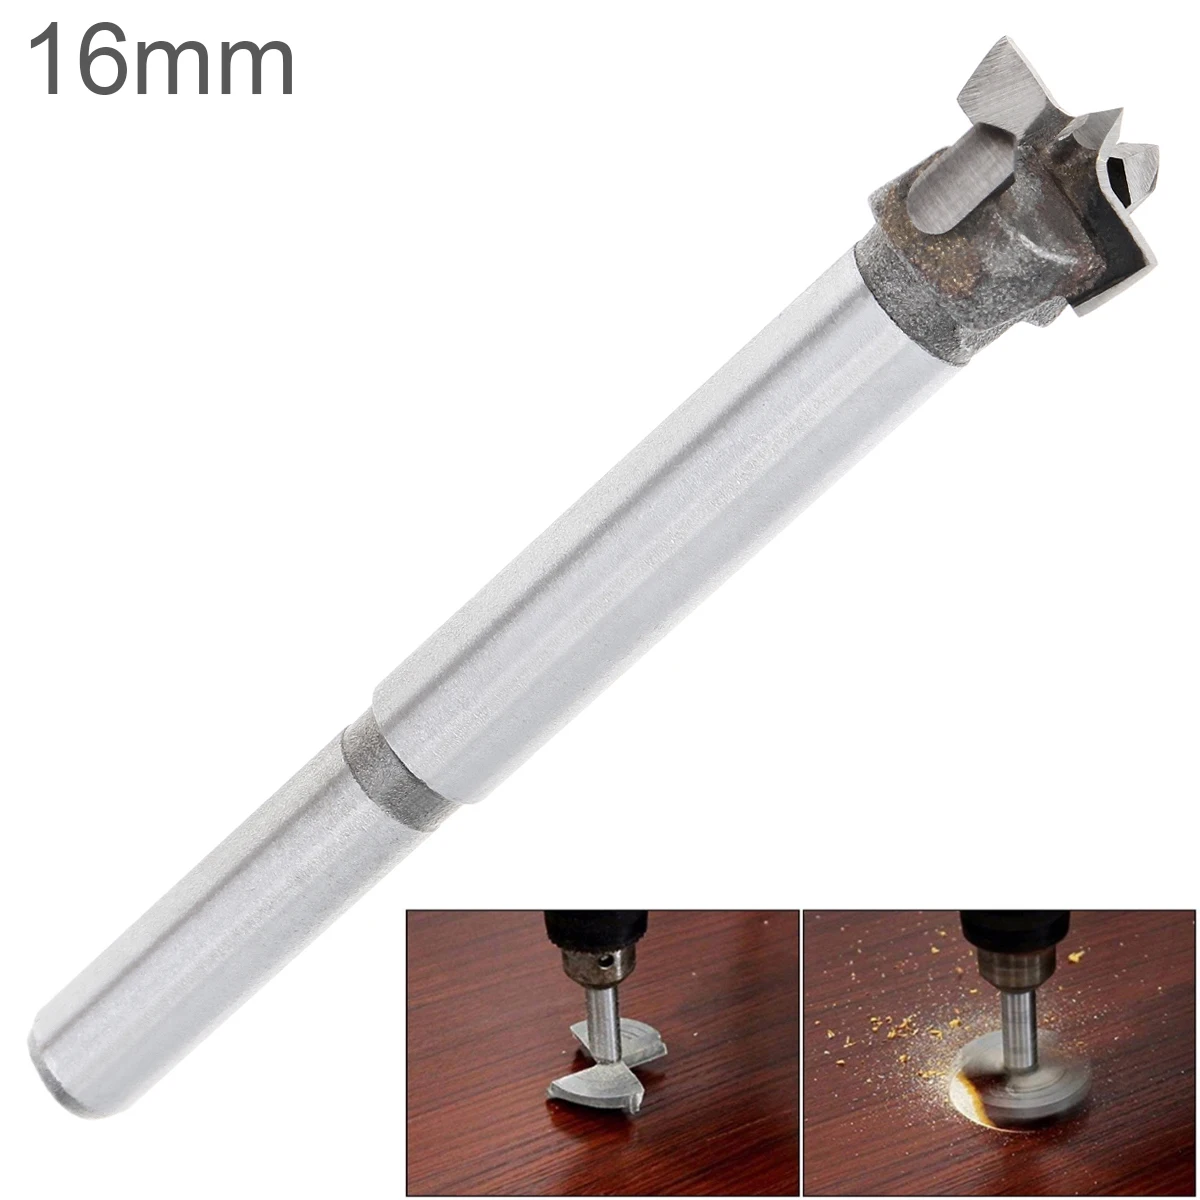 16mm Tungsten Steel Hard Alloy Wood Drill Bits Woodworking Hole Opener for Drilling on Plasterboard /Plastic Board /Wooden Board new wood drill bit self centering hole saw cutter woodworking tools 16mm 25mm carbon steel hexagonal shank drill bits